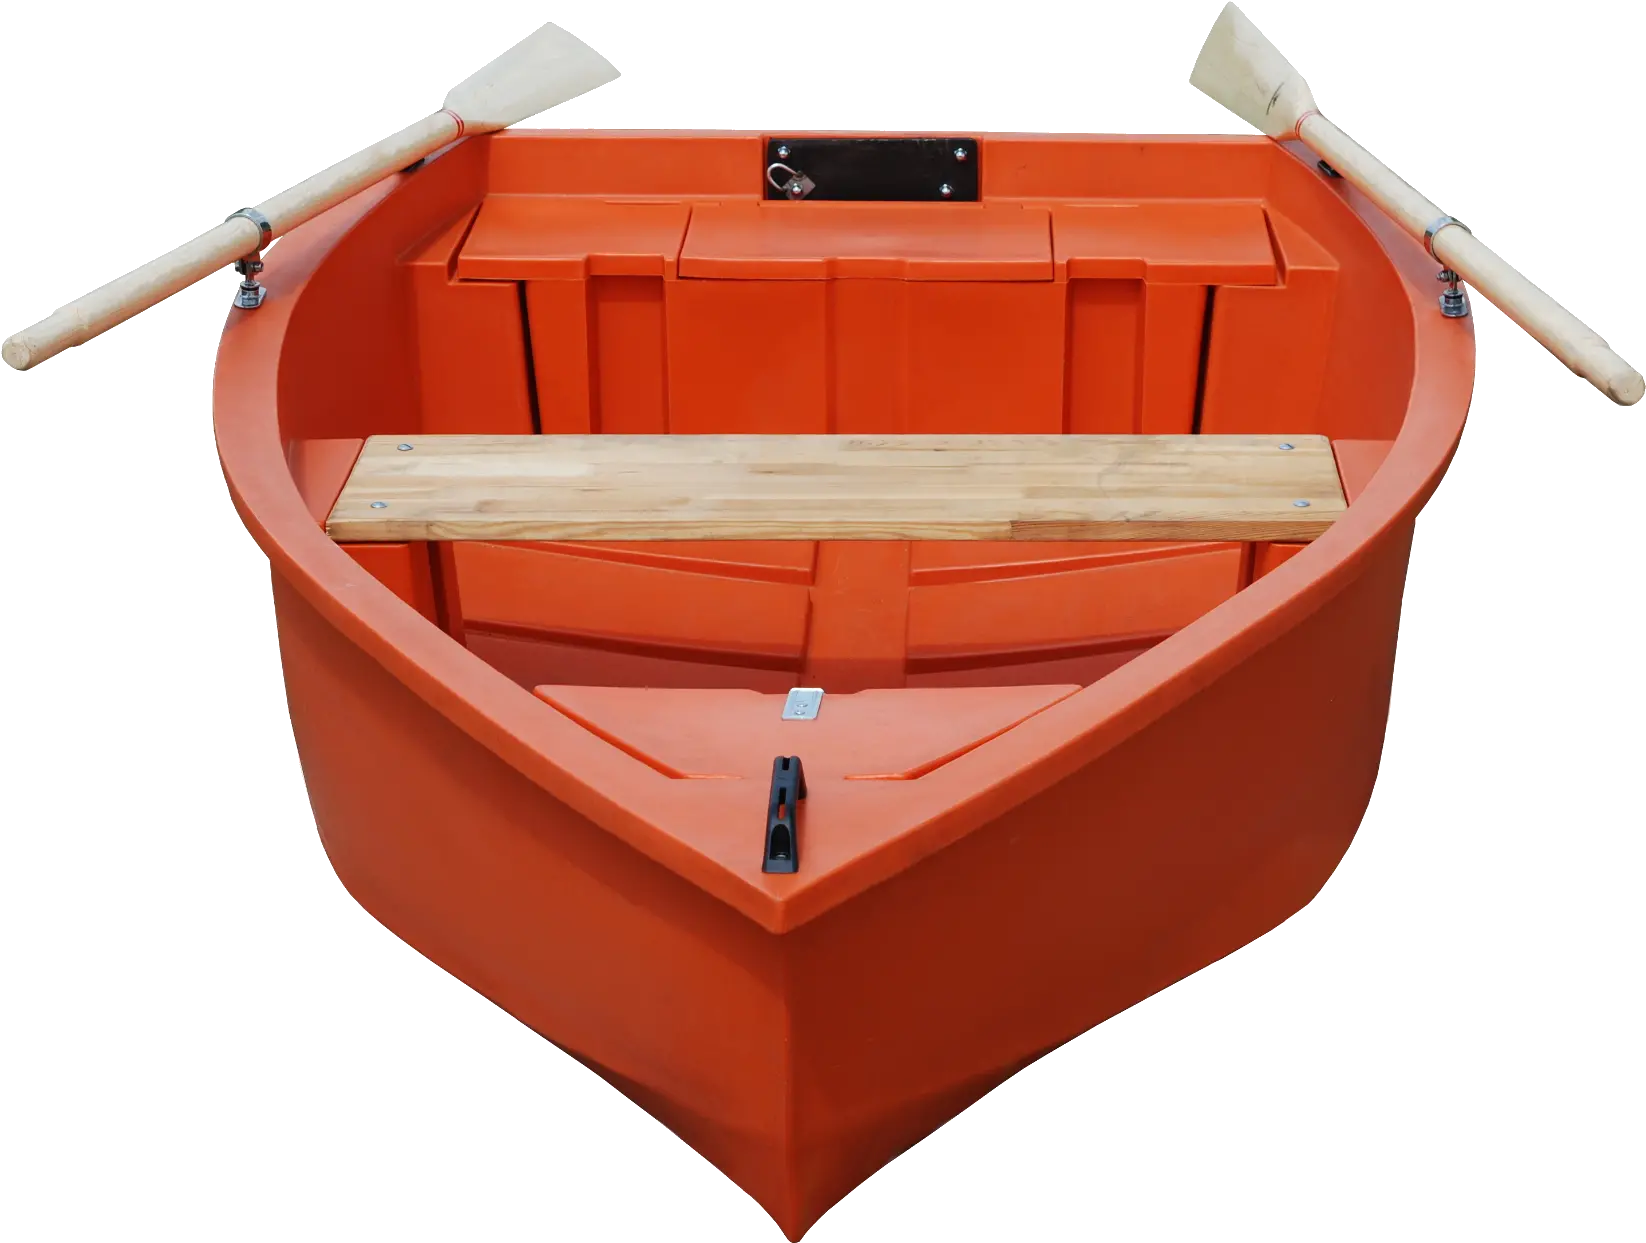 Wooden Boat Png Image For Free Download Boat Front View Png Boat Png